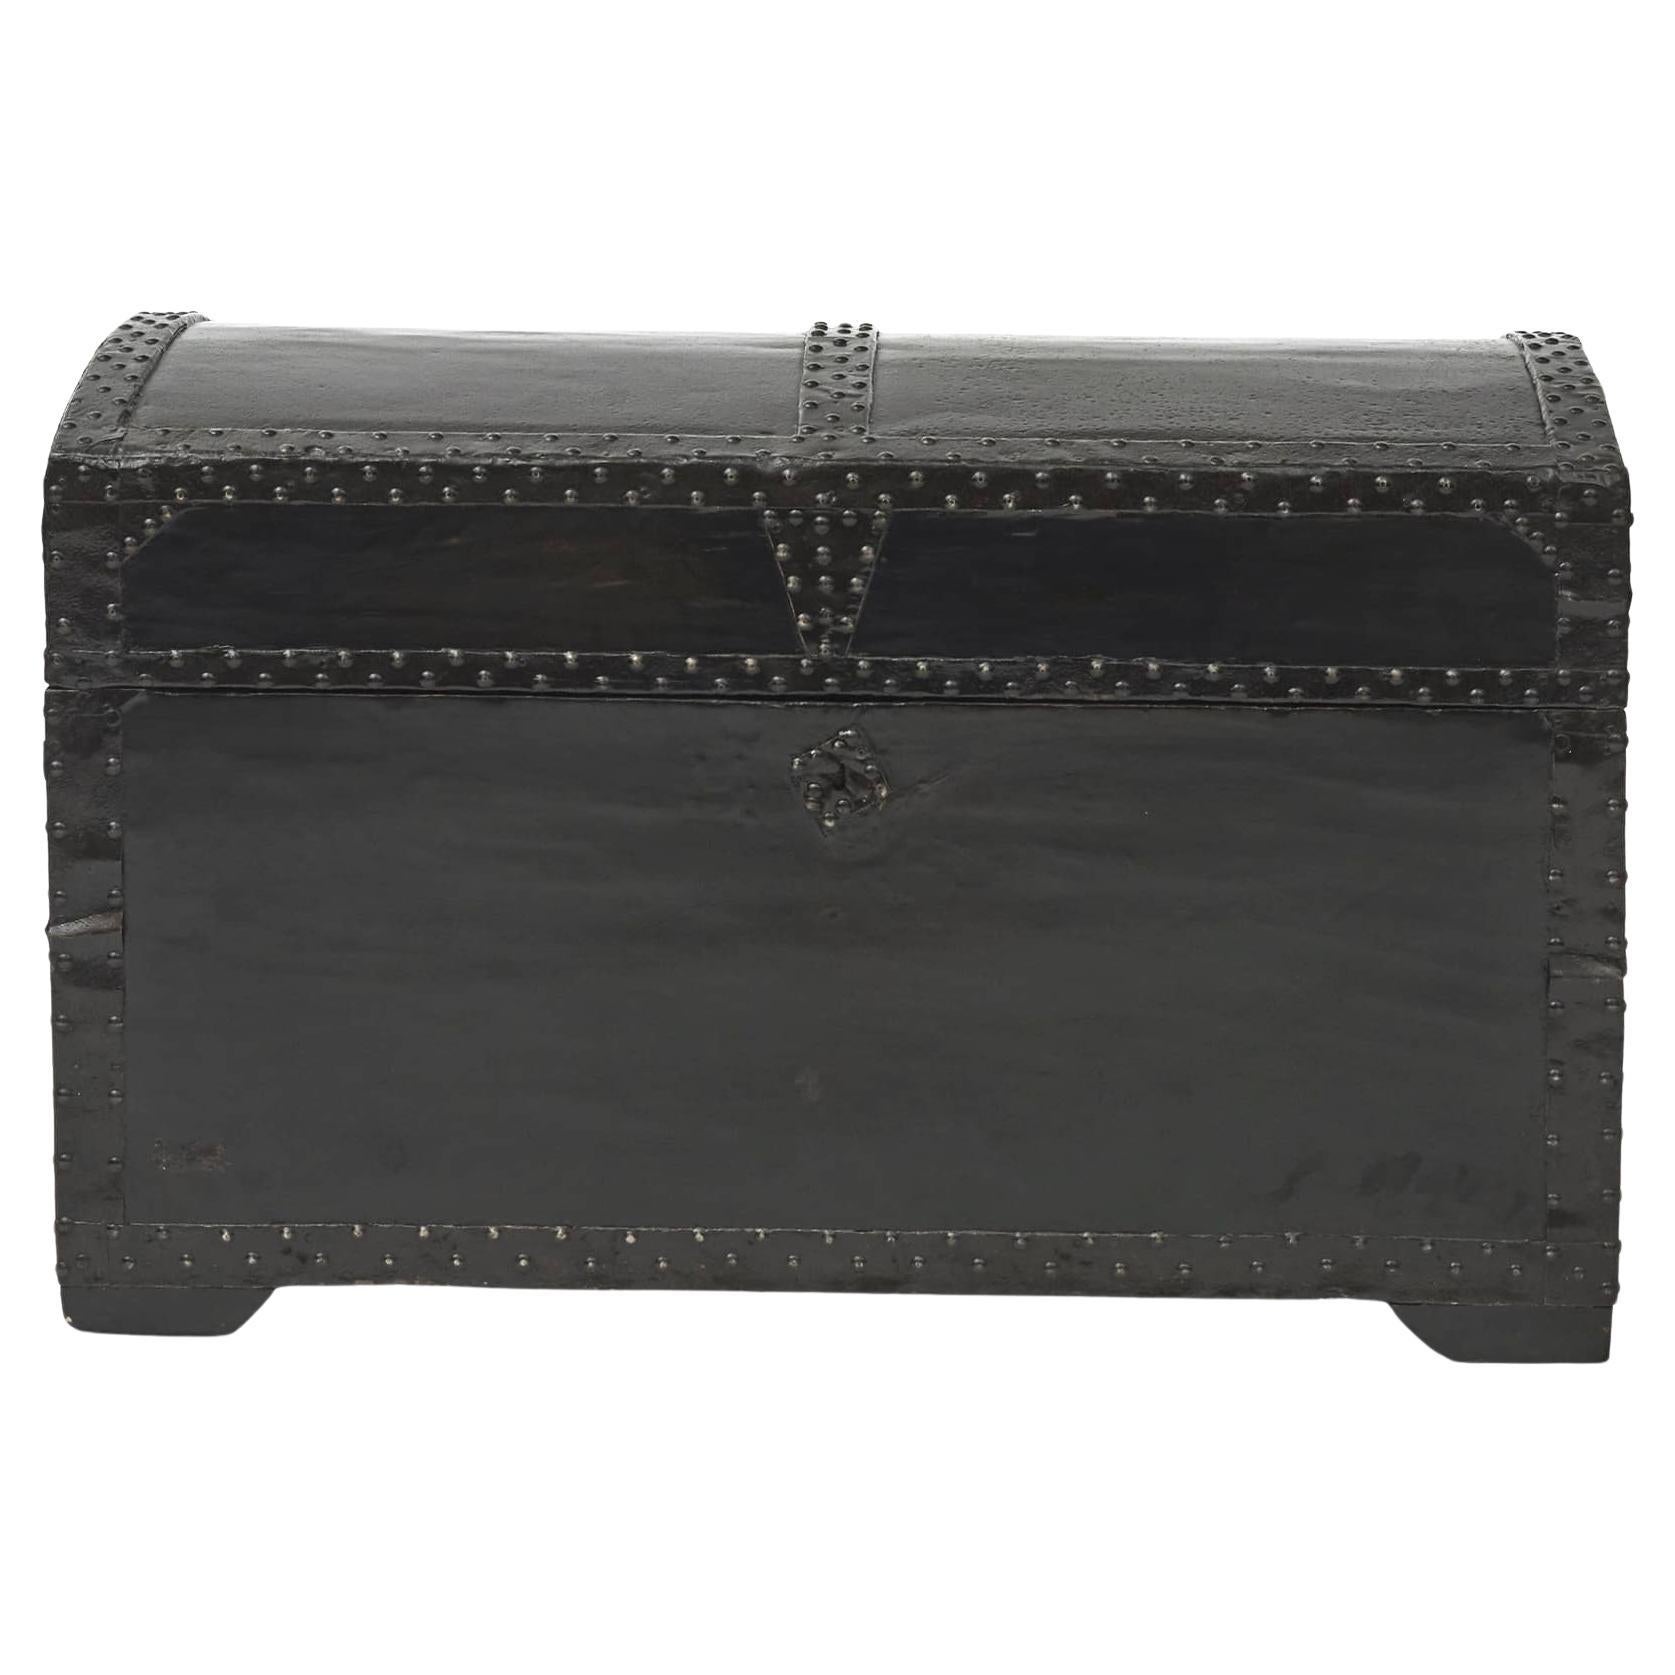 18th Century Wooden Chest with Black Lacquer